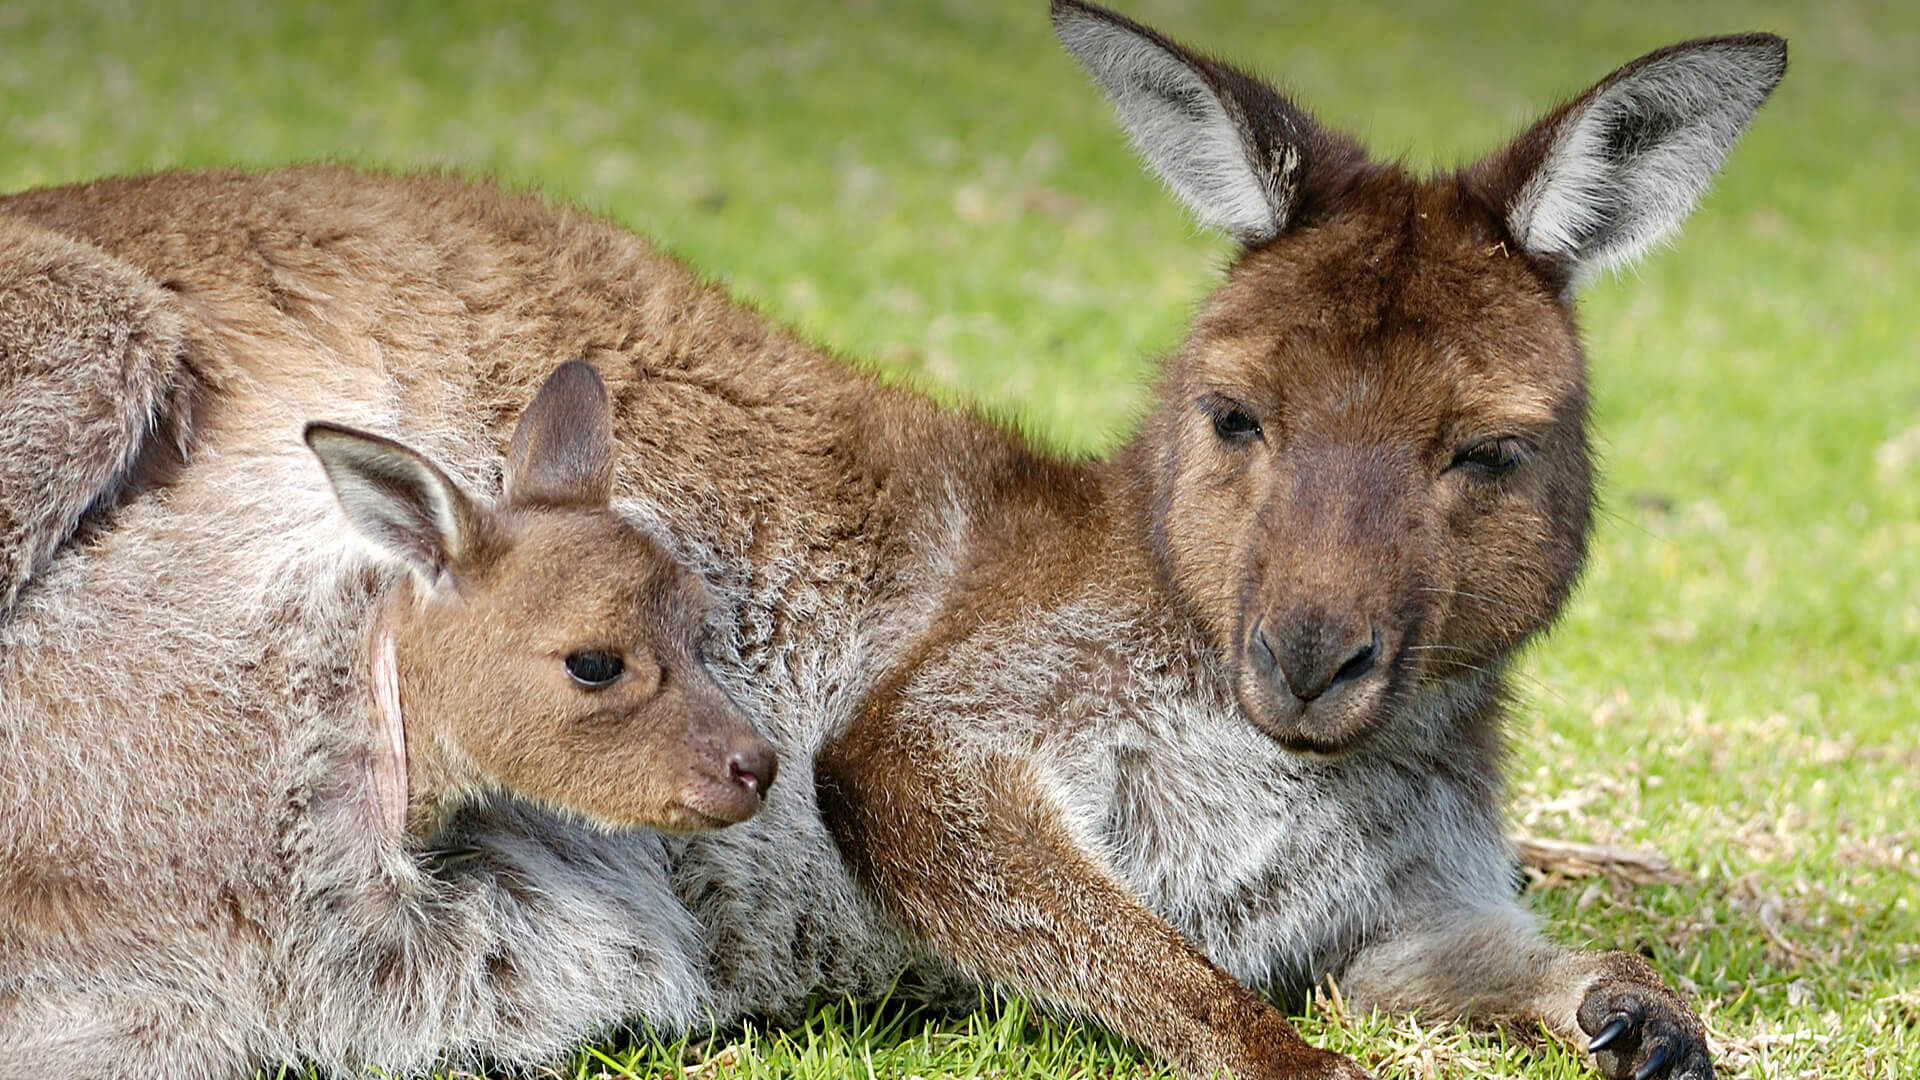 Kangaroo joey peeks out of its mother's much as mother lounges on grass